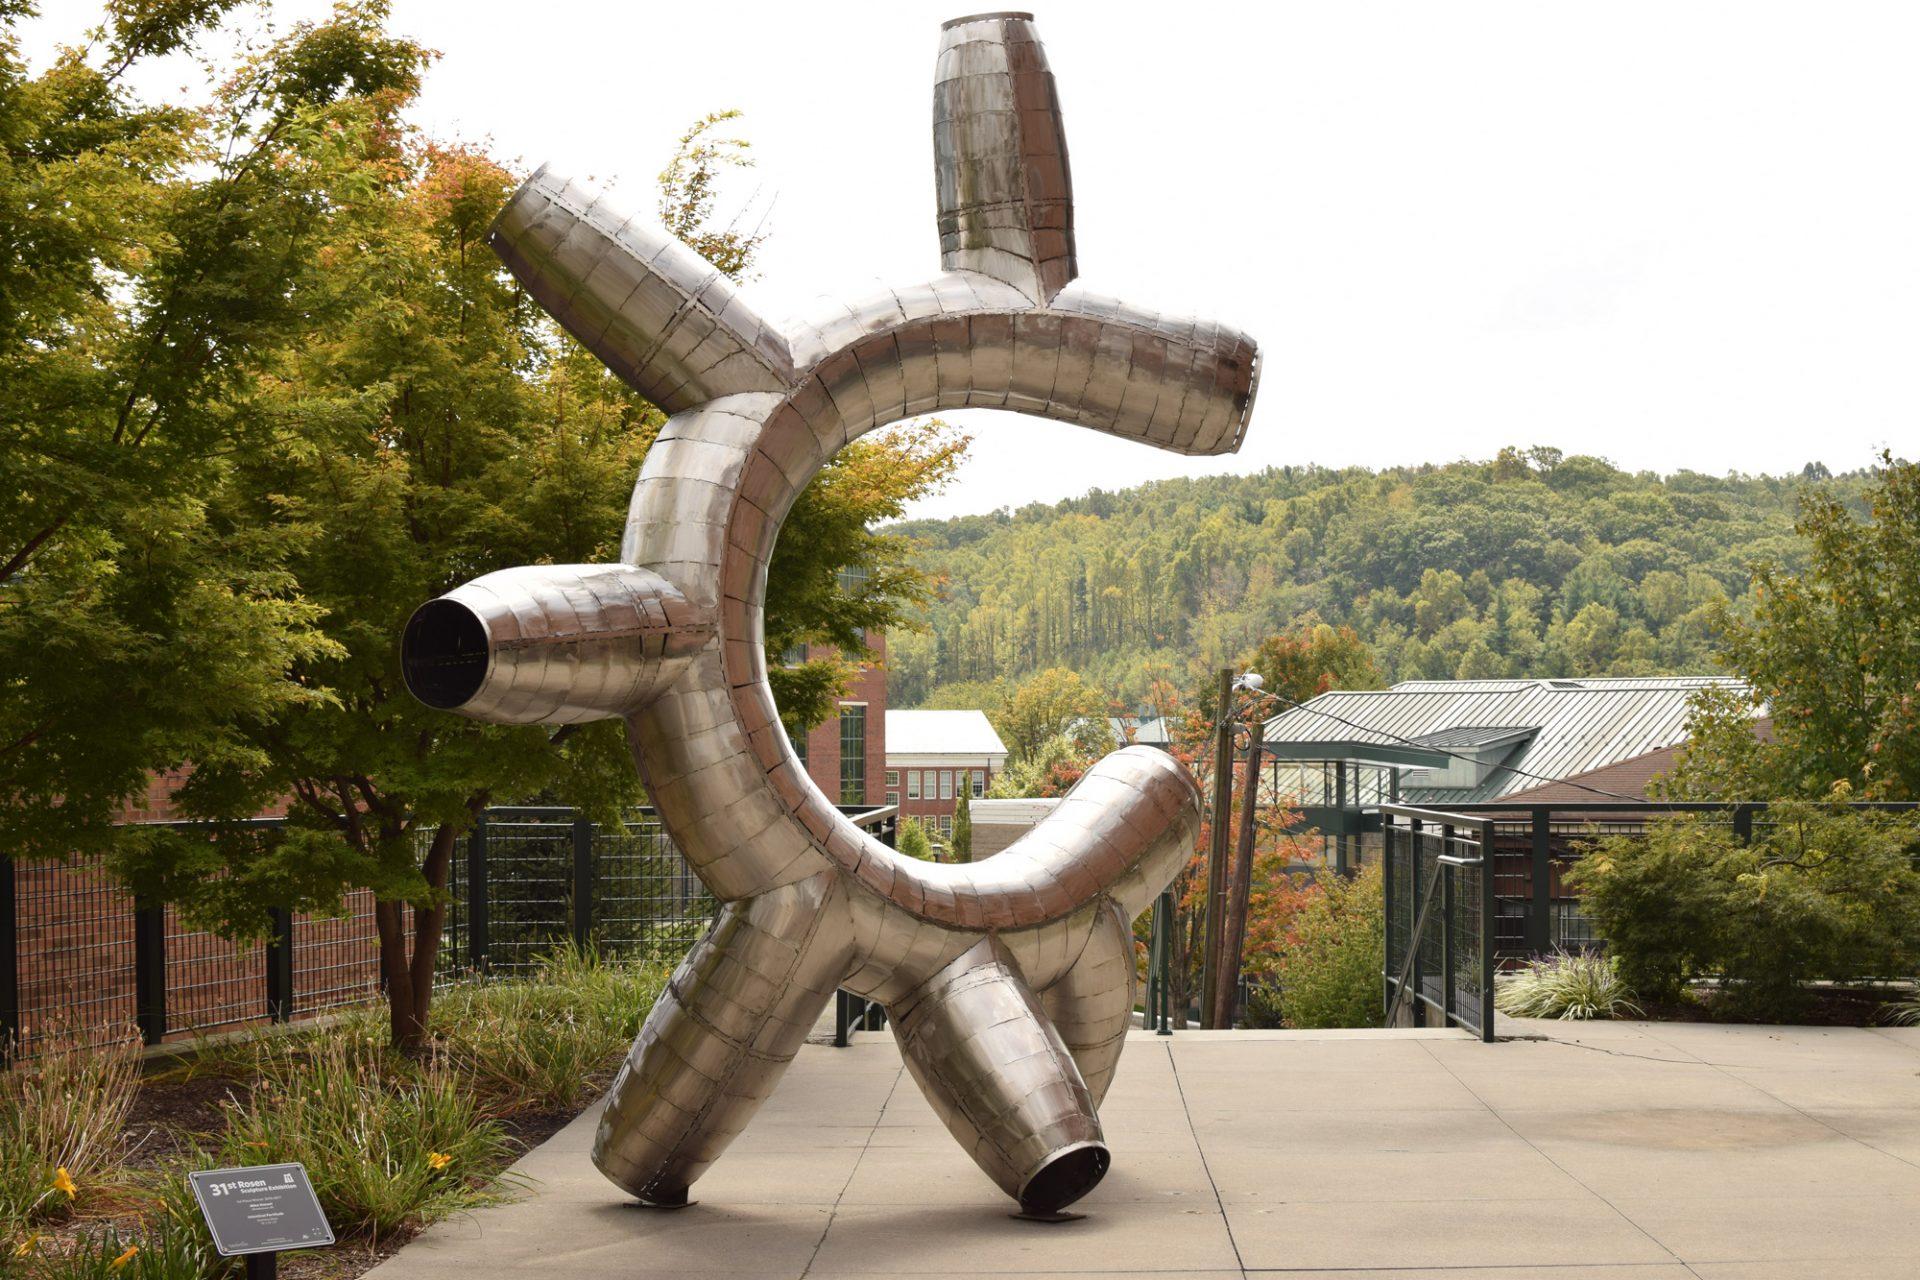 A+sculpture+outside+of+the+Turchin+Center%2C+located+on+King+Street+next+to+App+States+campus.+The+Turchin+Center+offers+free+and+discounted+programs+to+students+and+community+members+to+help+them+engage+with+their+own+and+others+art.